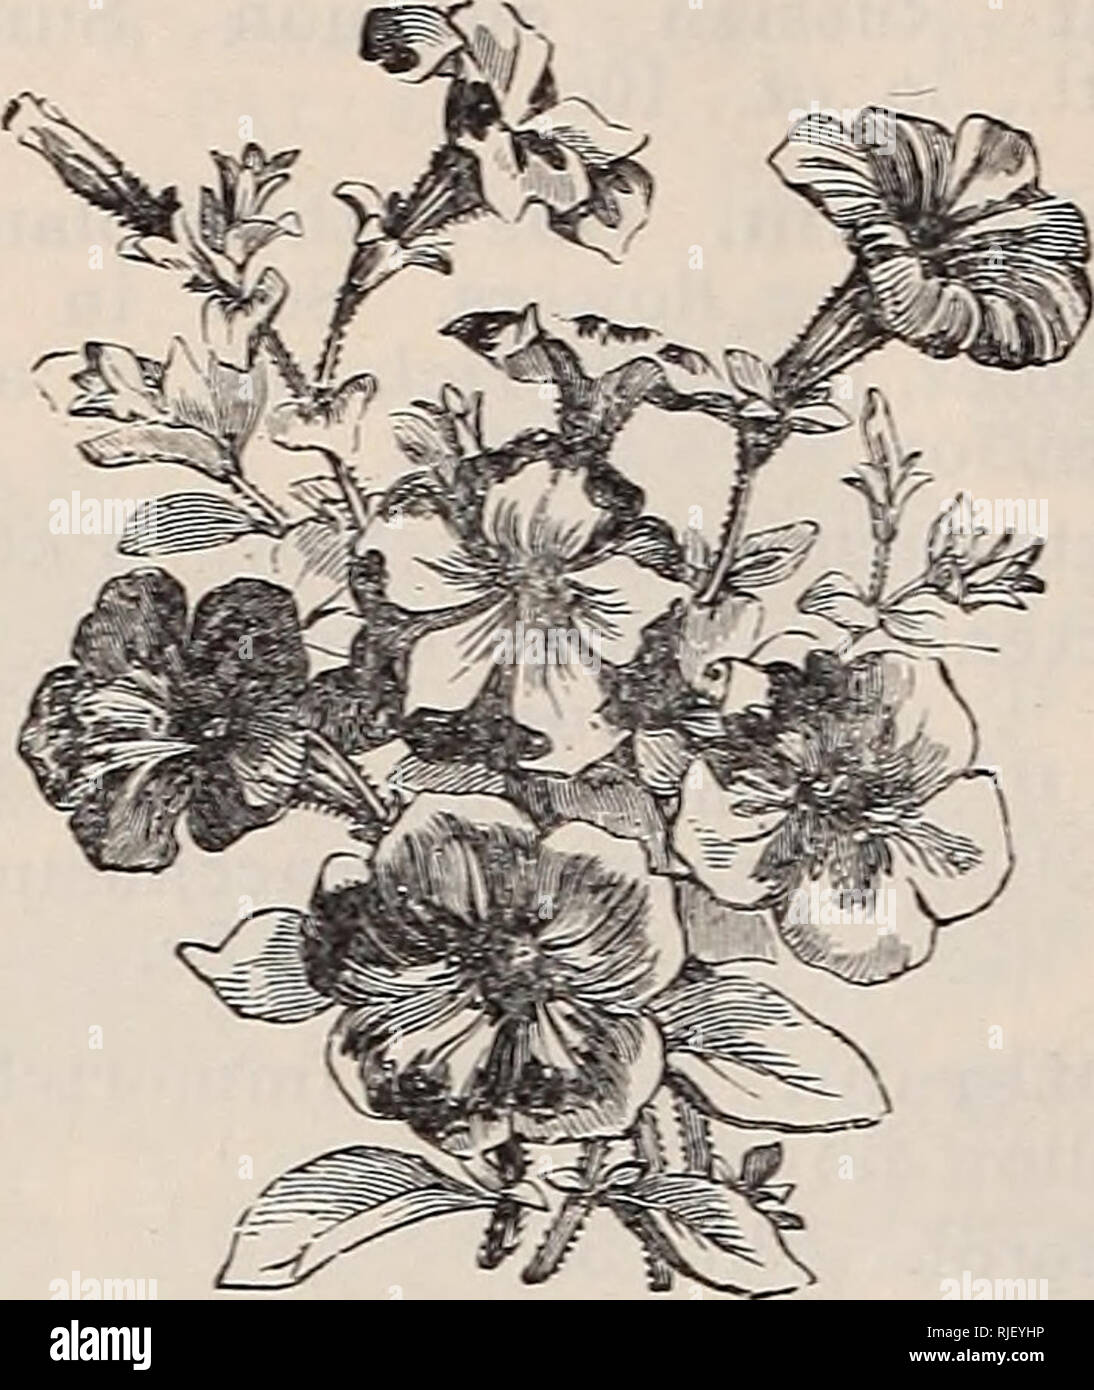 . Catalogue of vegetable, field, and flower seeds, 1895. Nursery stock New York (State) New York Catalogs; Vegetables Seeds Catalogs; Flowers Seeds Catalogs. 82 CHAS. SCHWAKE, 404 E. 34th STREET, N. Y. Impatiens. A very pretty plant for pots and the garden. When taken in the greenhouse in Fall they will flower all winter.. IPOMCEA. Sultani, carmine flowers. Pkt., 20c. Inula ensifolia. See Novelties. Ipomoea. The same as Convolvulus. Imperialis, new. See Novelties. Pkt., 15c. Grandiflora alba, white. Pkt., 10c. Nil grandiflora, light blue. Pkt., 10c. Limbata, purple, white margined. Pkt., 10c.  Stock Photo